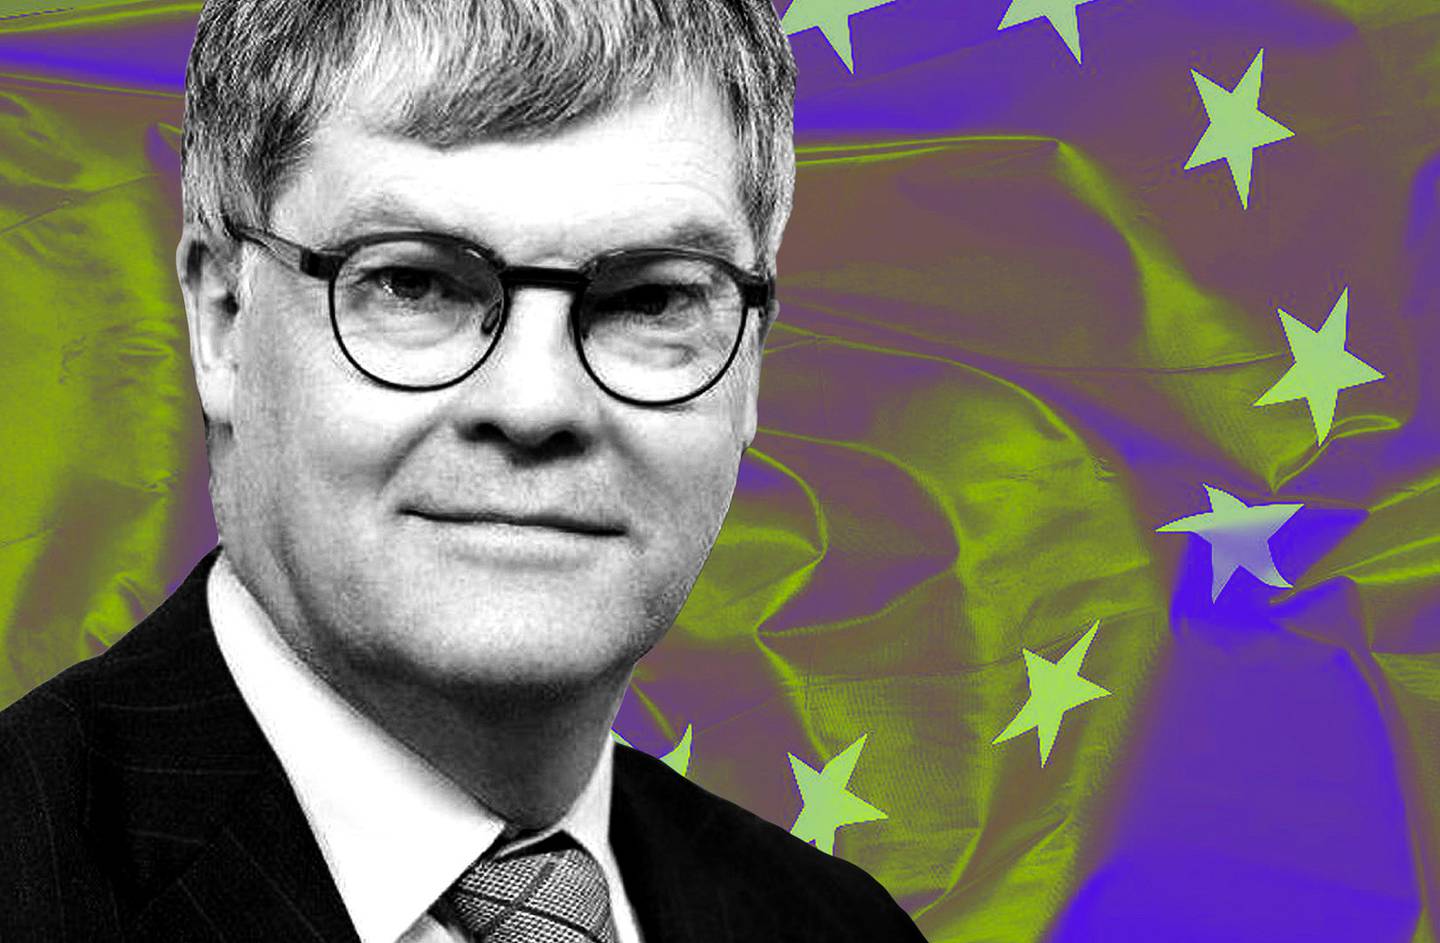 Portrait of Pearse O'donohue over a background of the EU flag.